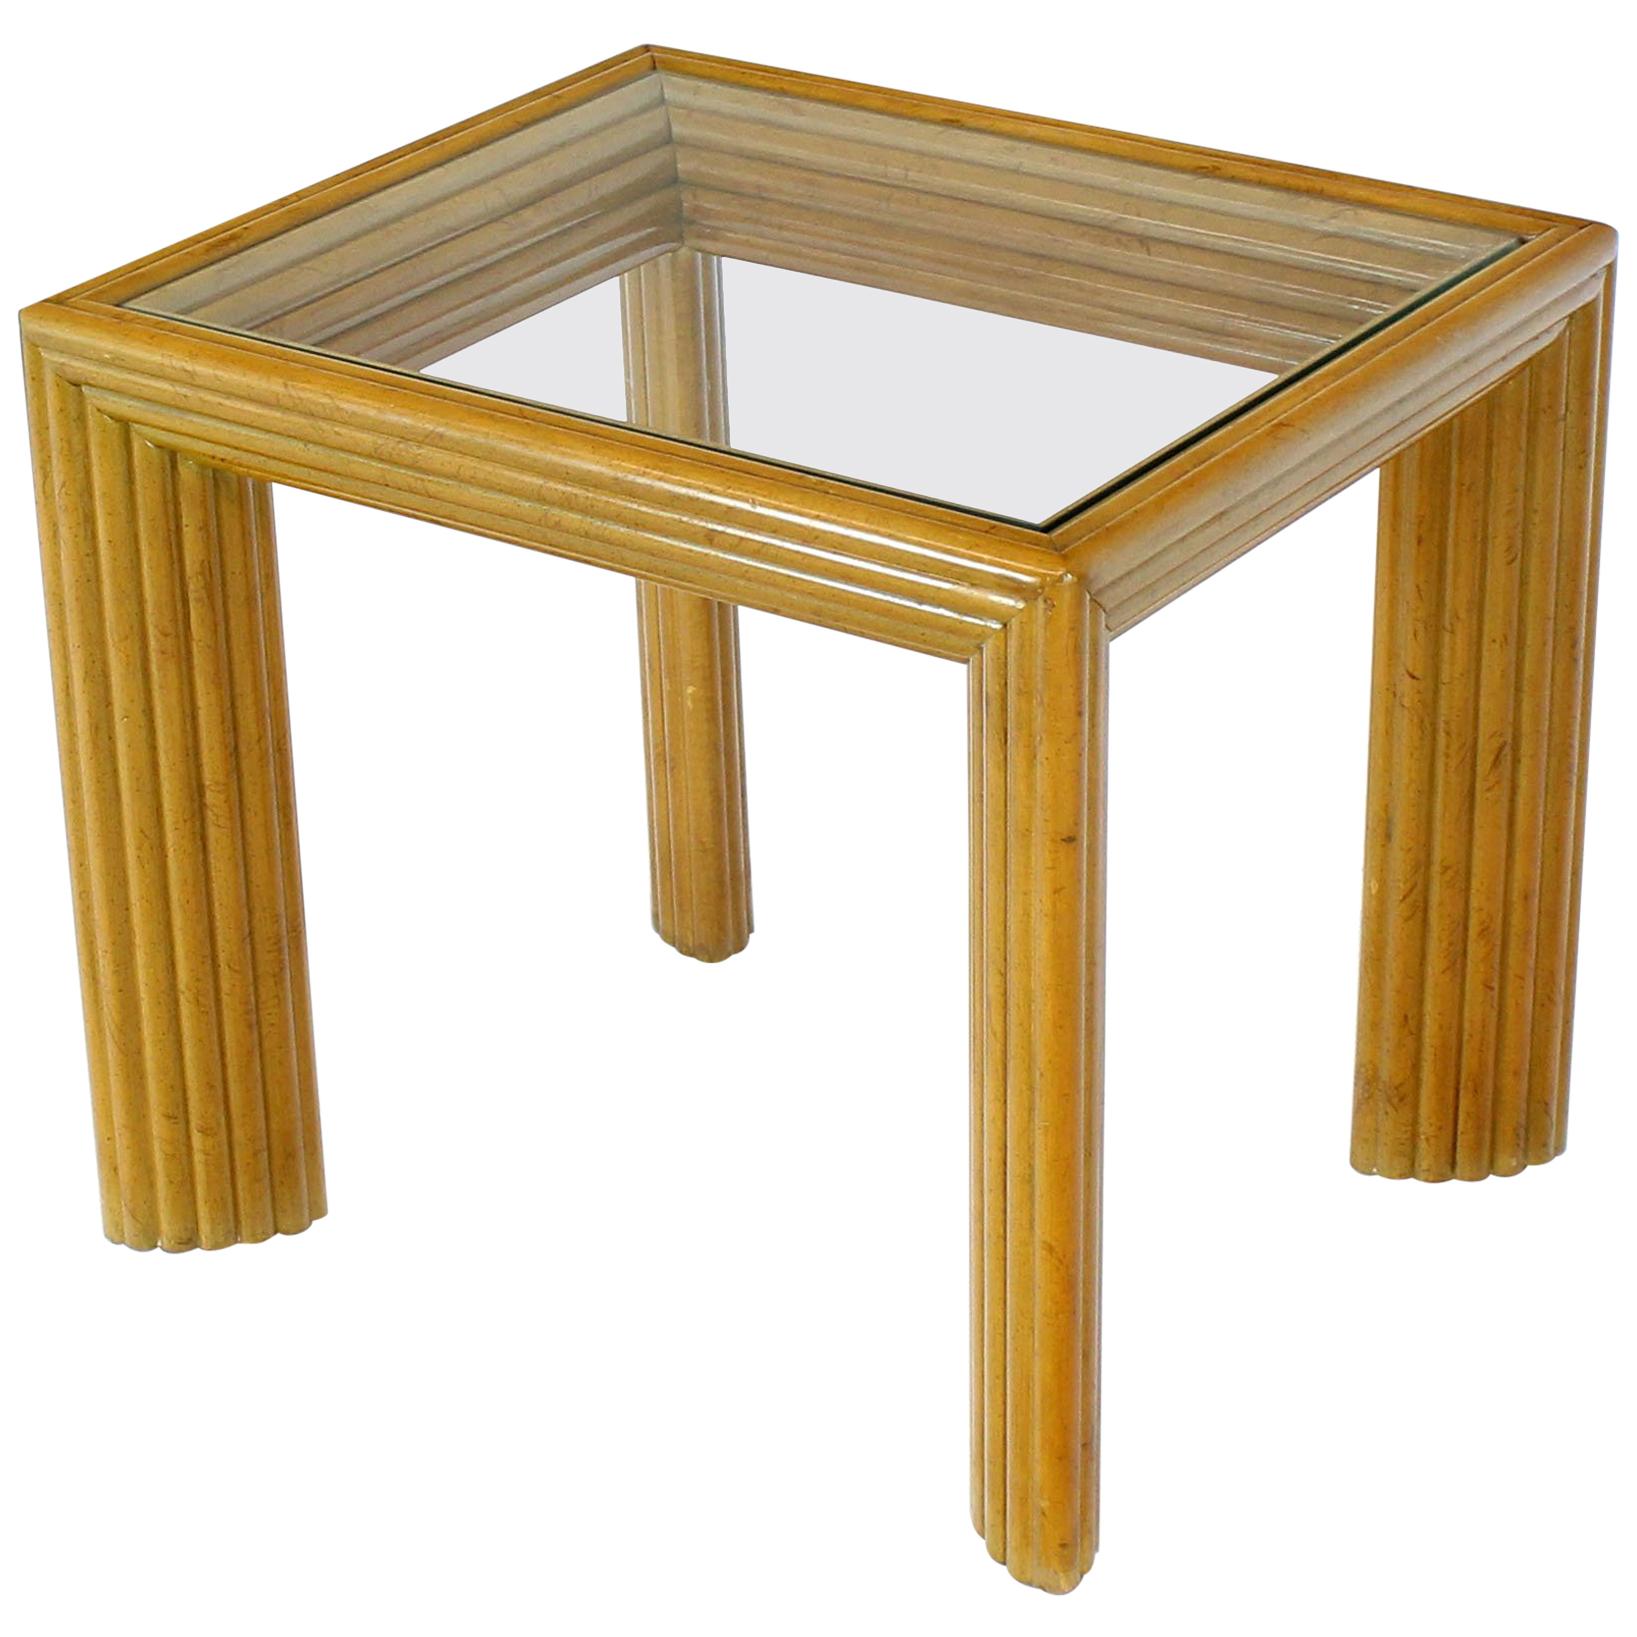 Solid Blond Birch Rectangular Occasional Side Table Stand